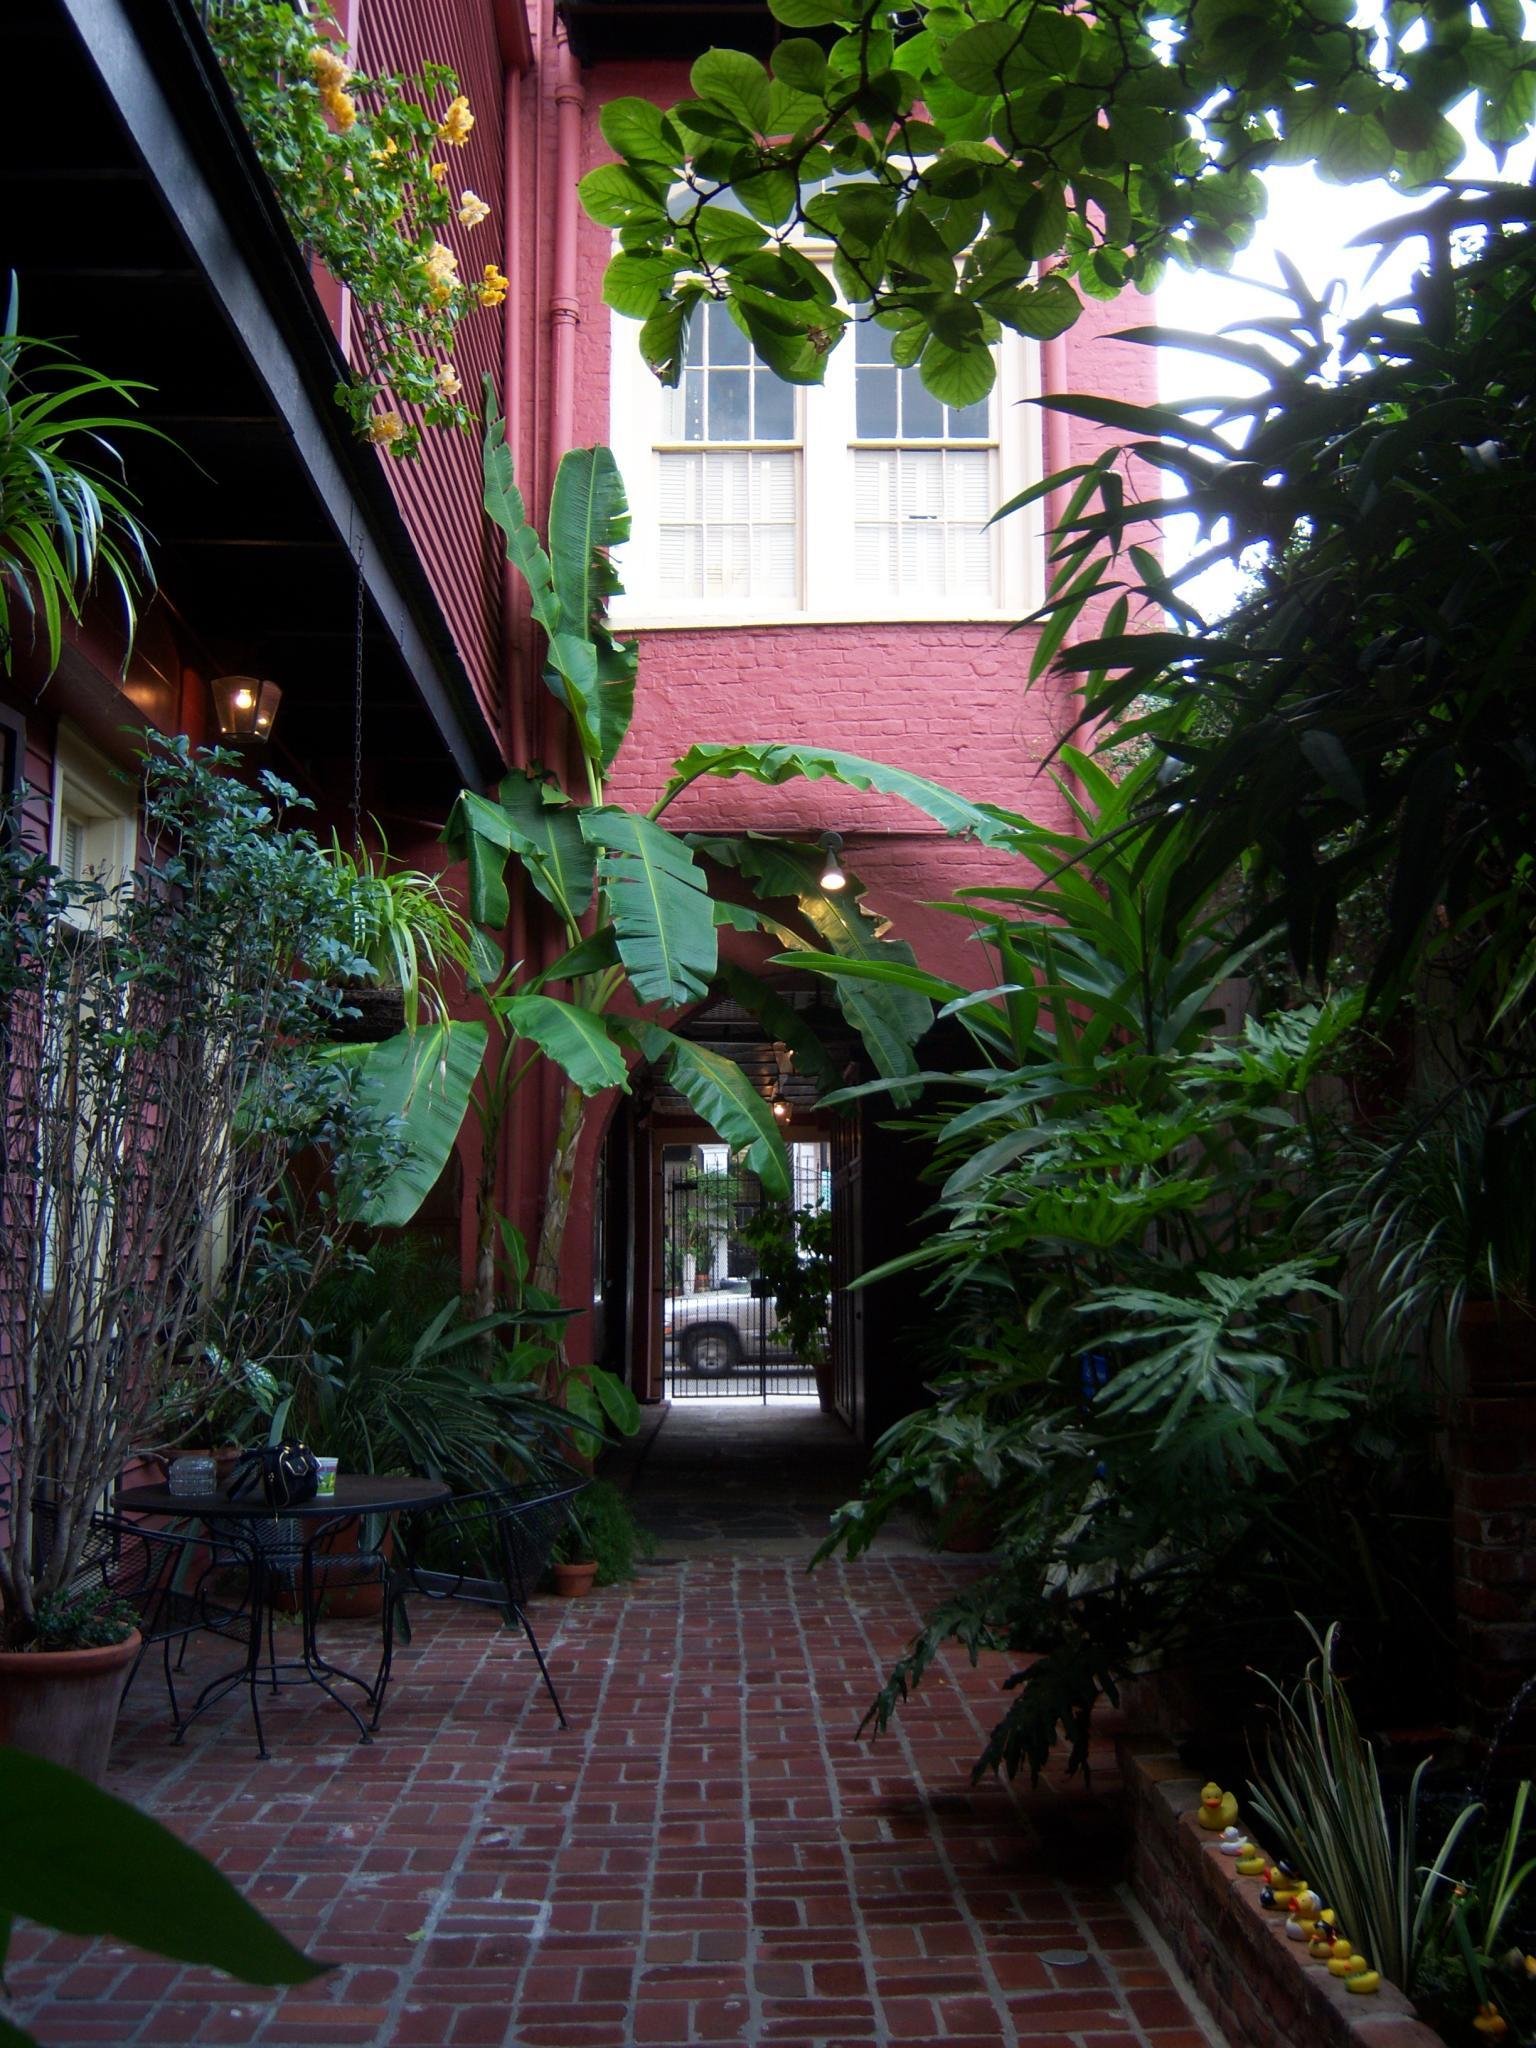 The Courtyards